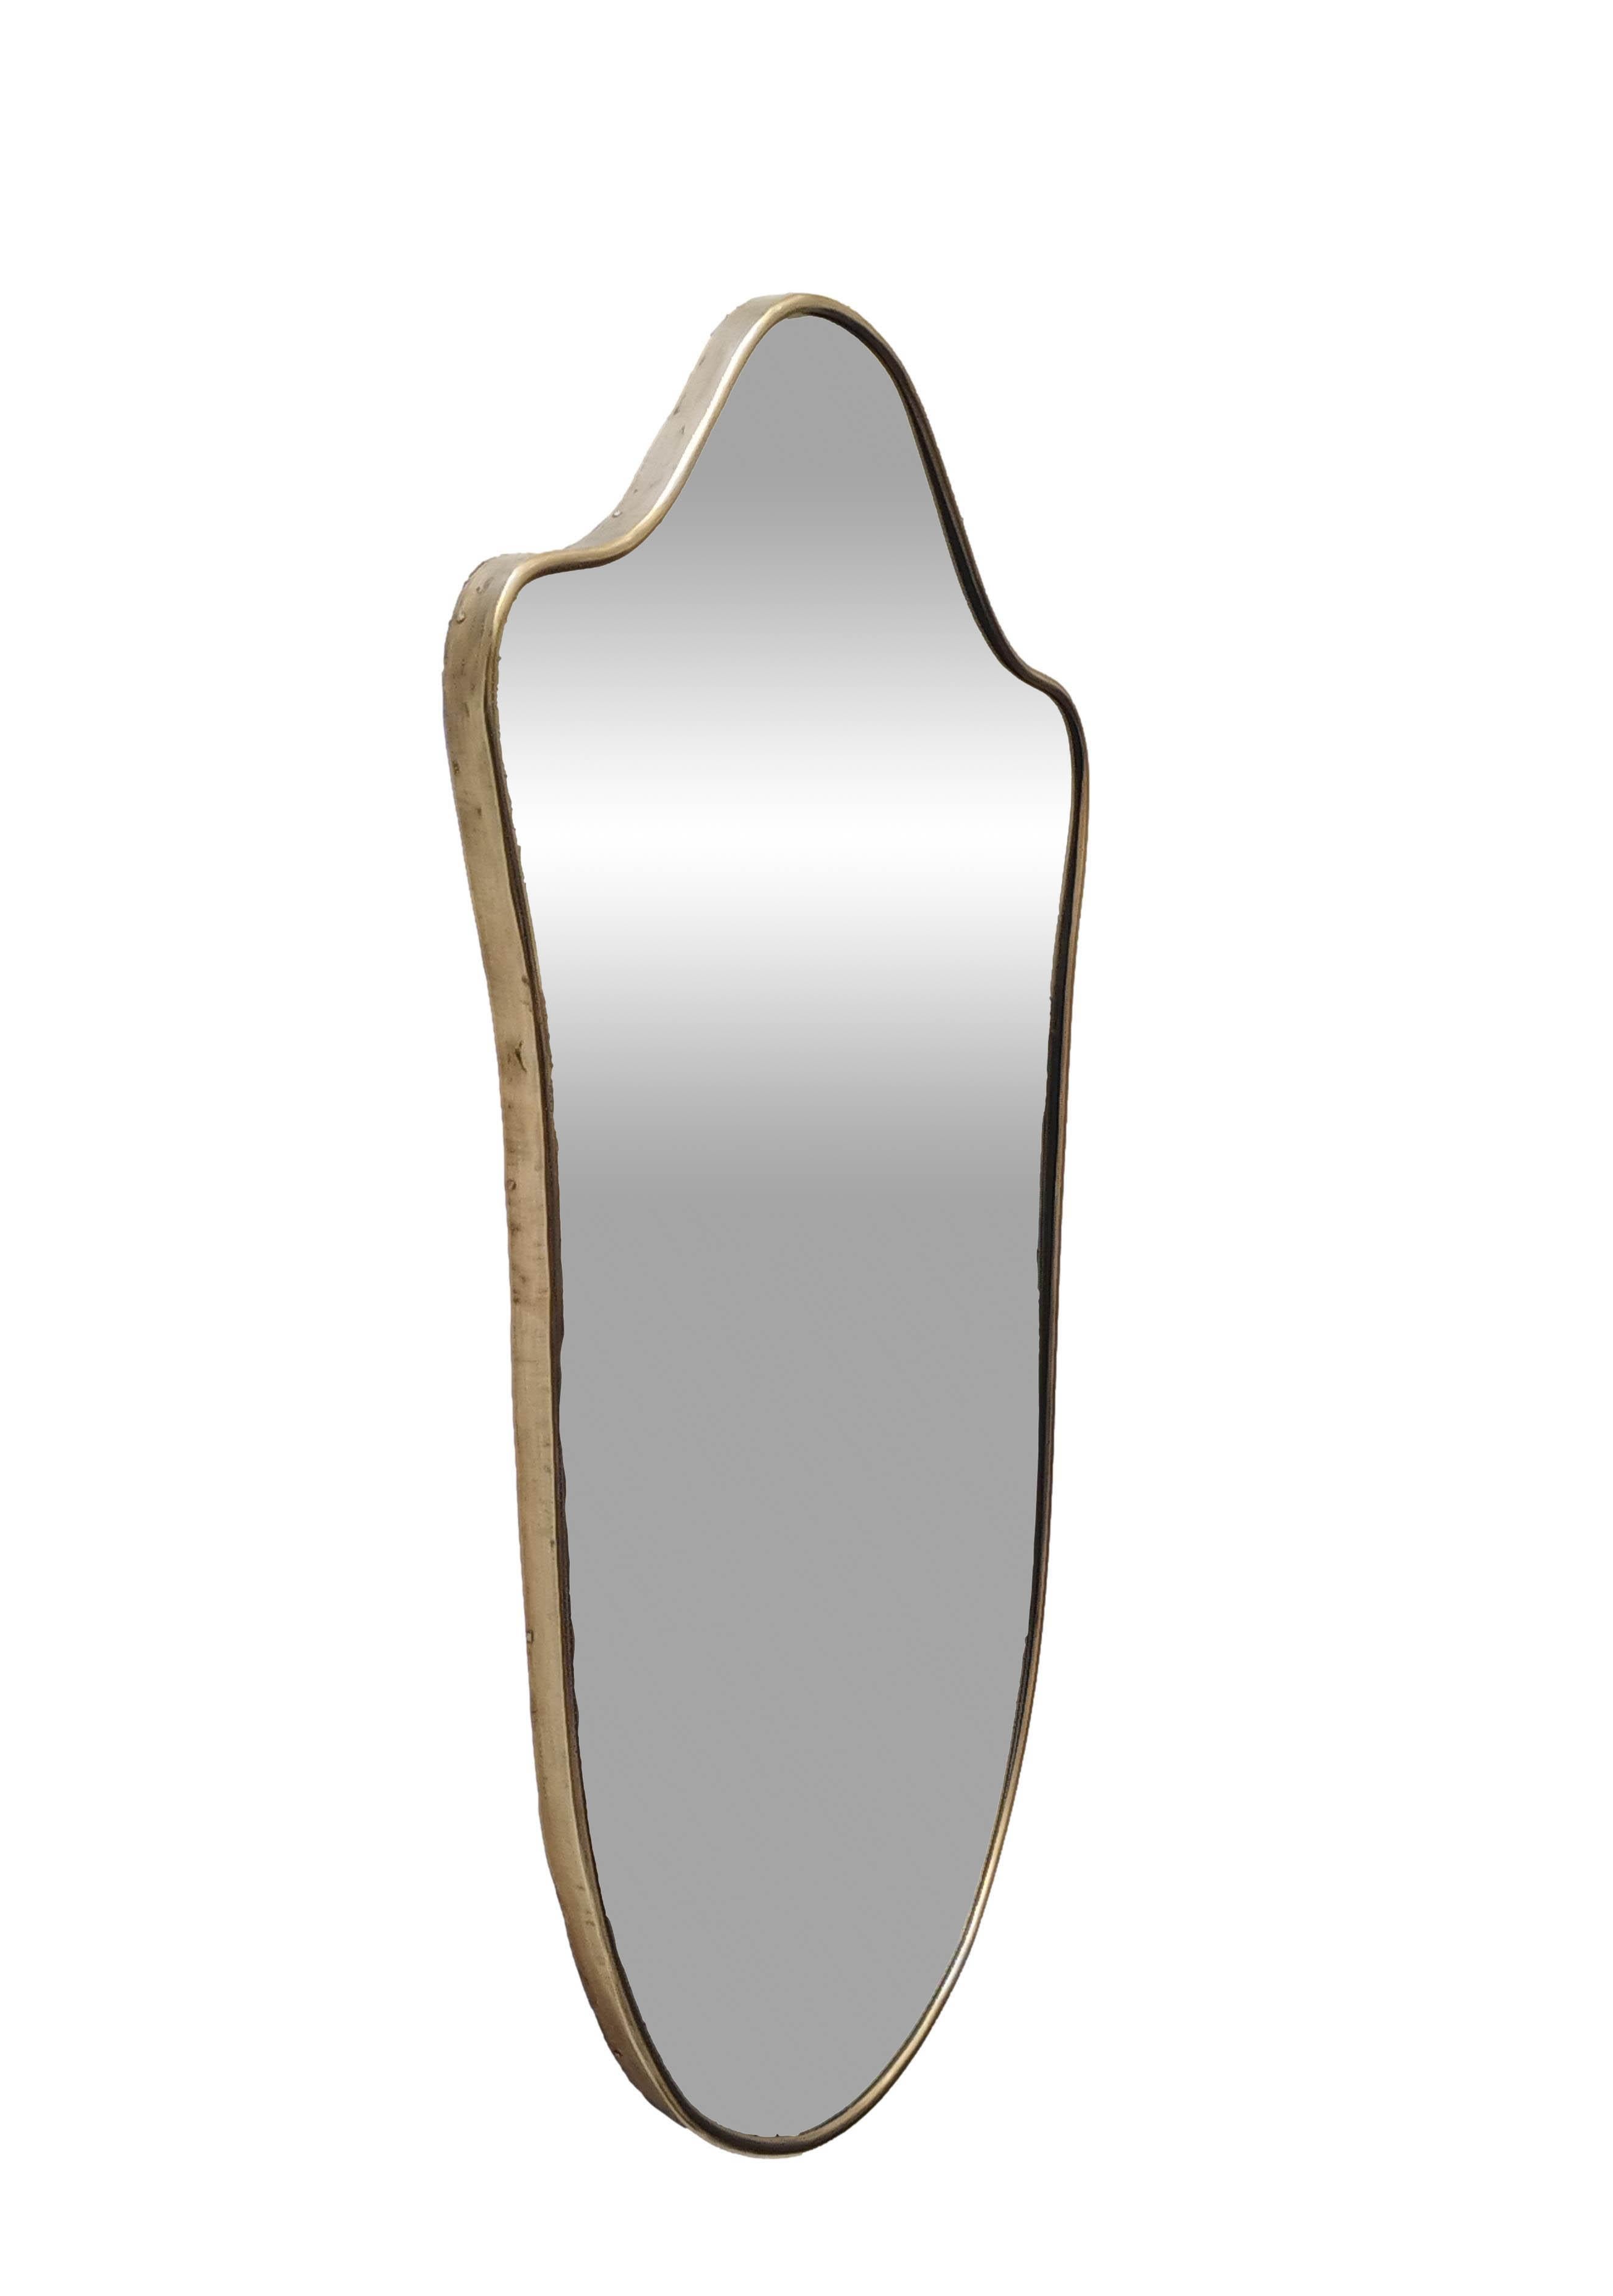 Mid-century Italian wall mirror with brass frame (circa 1950). in the style of the designers of the period, Gio Ponti, Fontana Arte, Max Ingrand, Franco Albini and Josef Frank. 